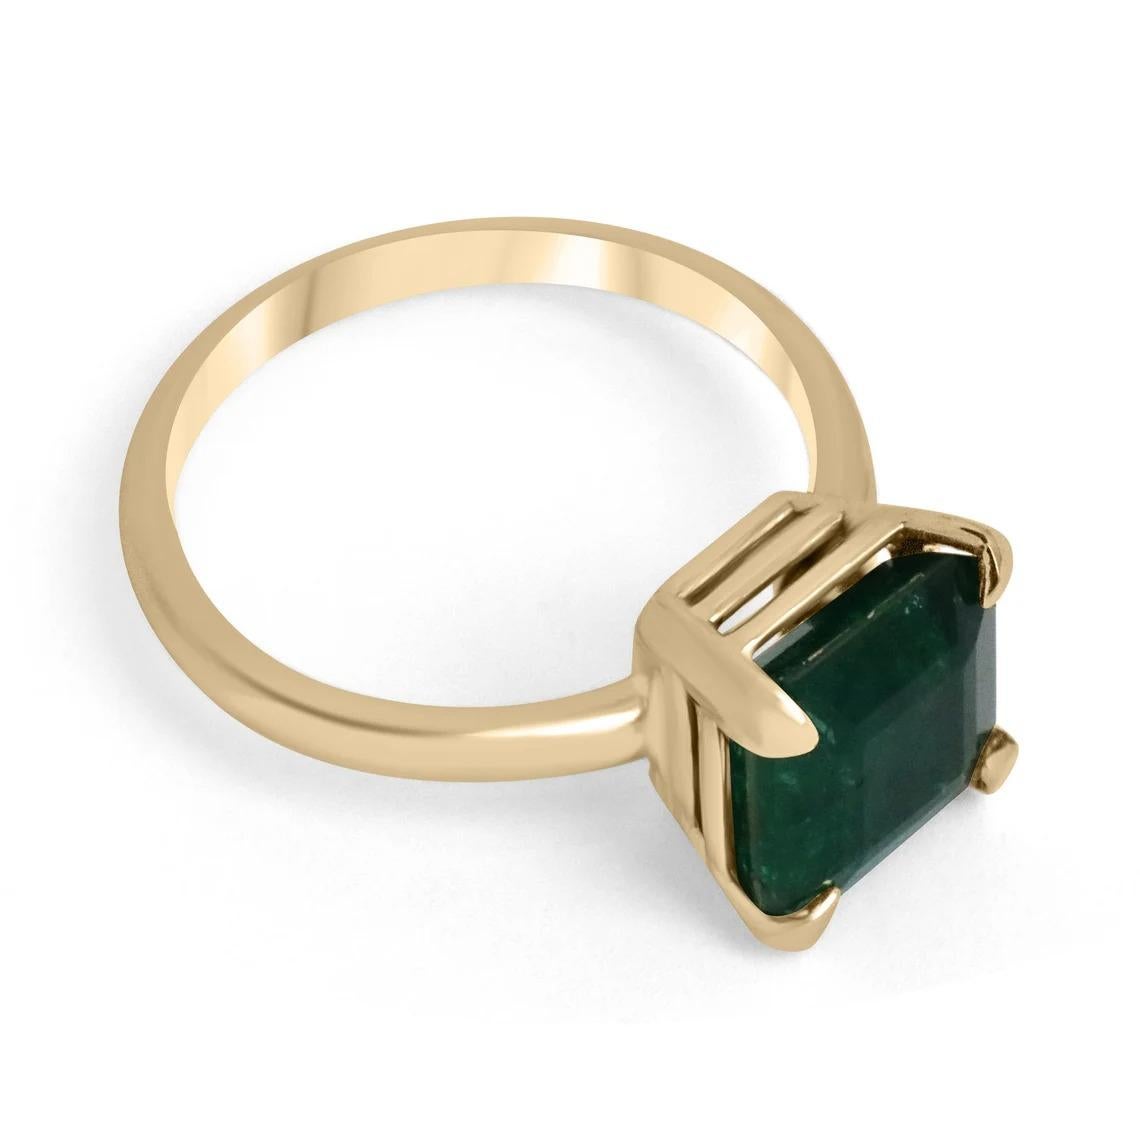 Displayed is a classic emerald solitaire Asscher-cut engagement ring/right-hand ring in 18K yellow gold. This gorgeous solitaire ring carries a full 3.85-carat emerald in a four-prong setting. Fully faceted, this gemstone showcases excellent shine.